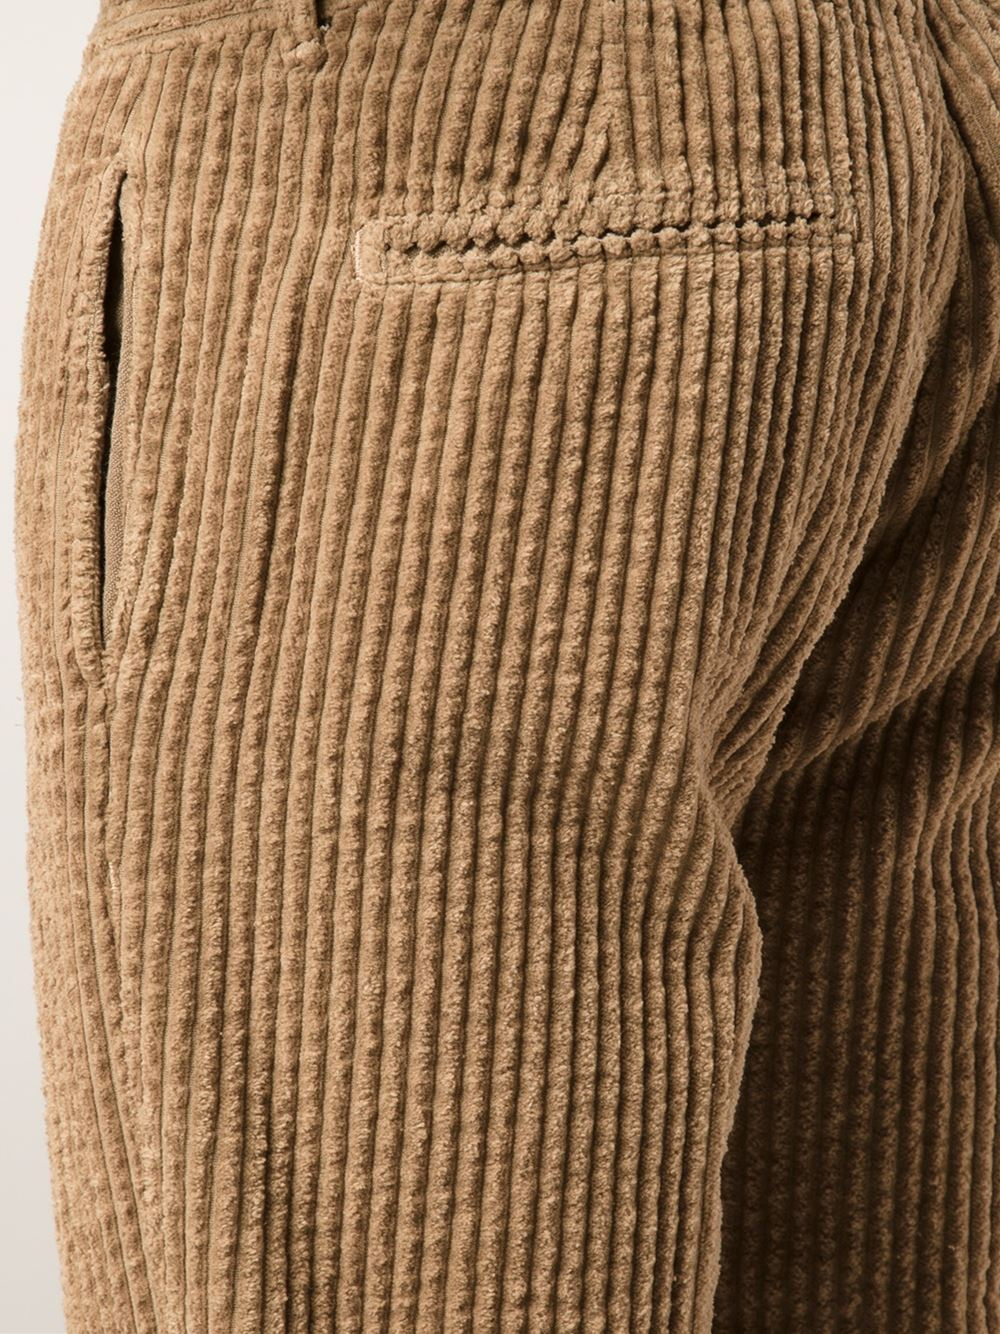 Lyst - Massimo Alba 'Winch Wide Corduroy' Trousers in Natural for Men